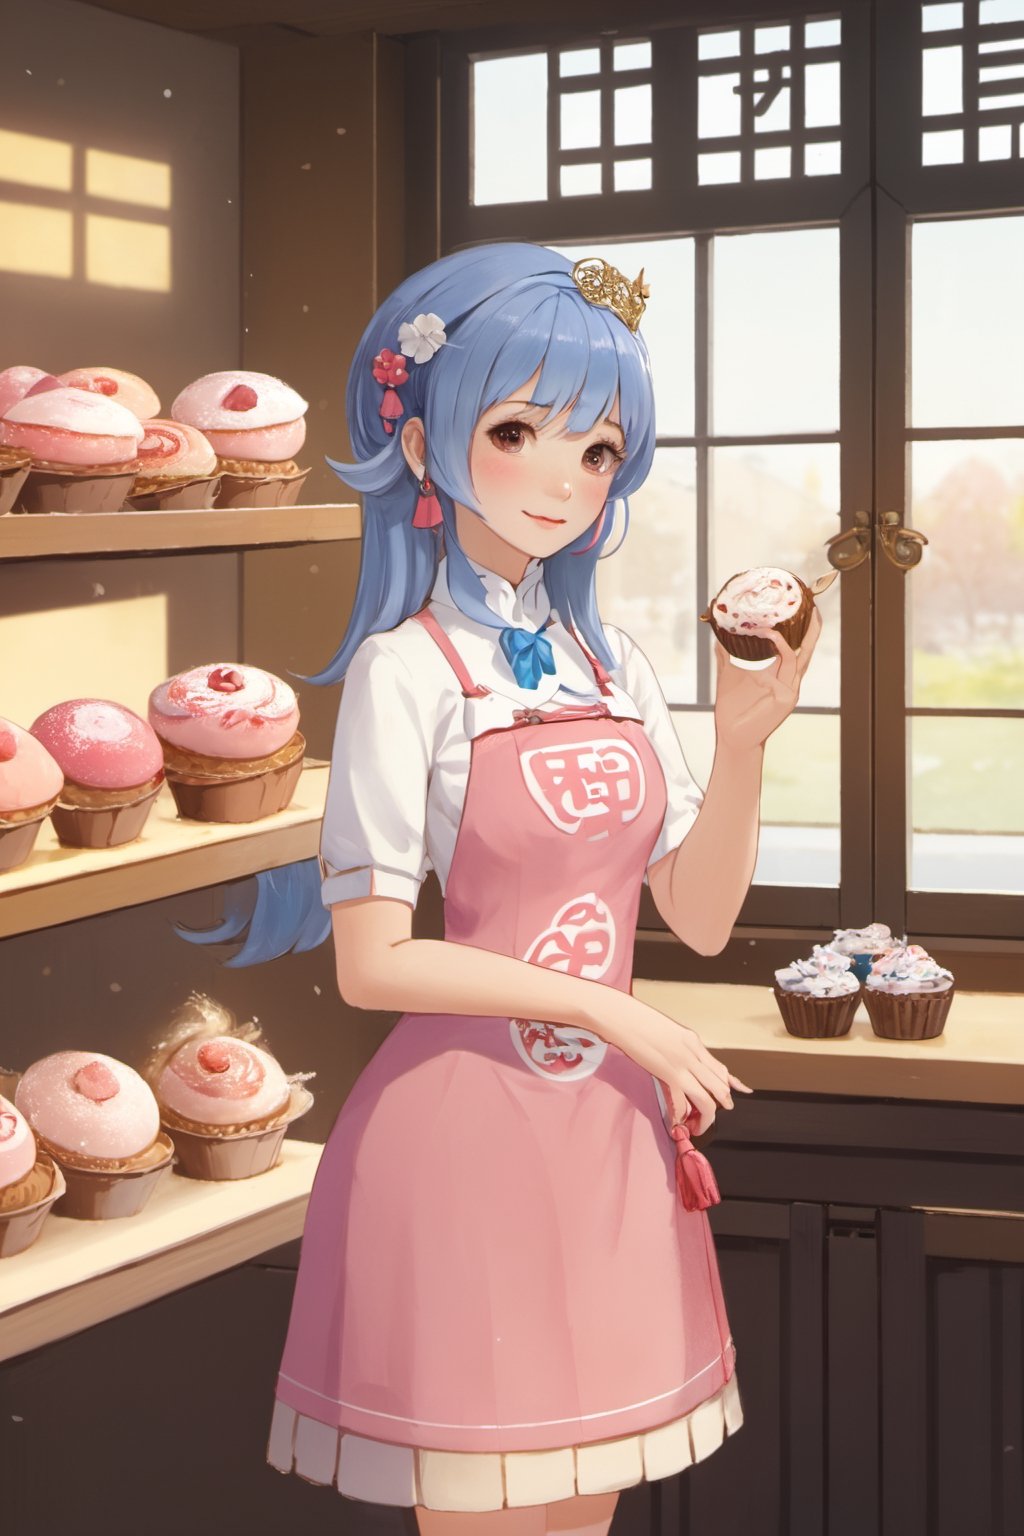 (masterpiece,  best quality,  highres:1.3), ultra resolution image,  (1girl),  (solo),  kawaii, pink hair, blue, (sweet charm:1.4),  pies,  fresh baked bread, macarons, wooden shelves with cupcakes, bakery, shop, scenery, soft, cozy, glitter,Kanna Kamui, ,Hori,1 girl,jennie,little_cute_girl,long hair, z cup,ancient_chinese_indoors,cosplay costume,bifang,mecha,no_humans,scenery,LinkGirl